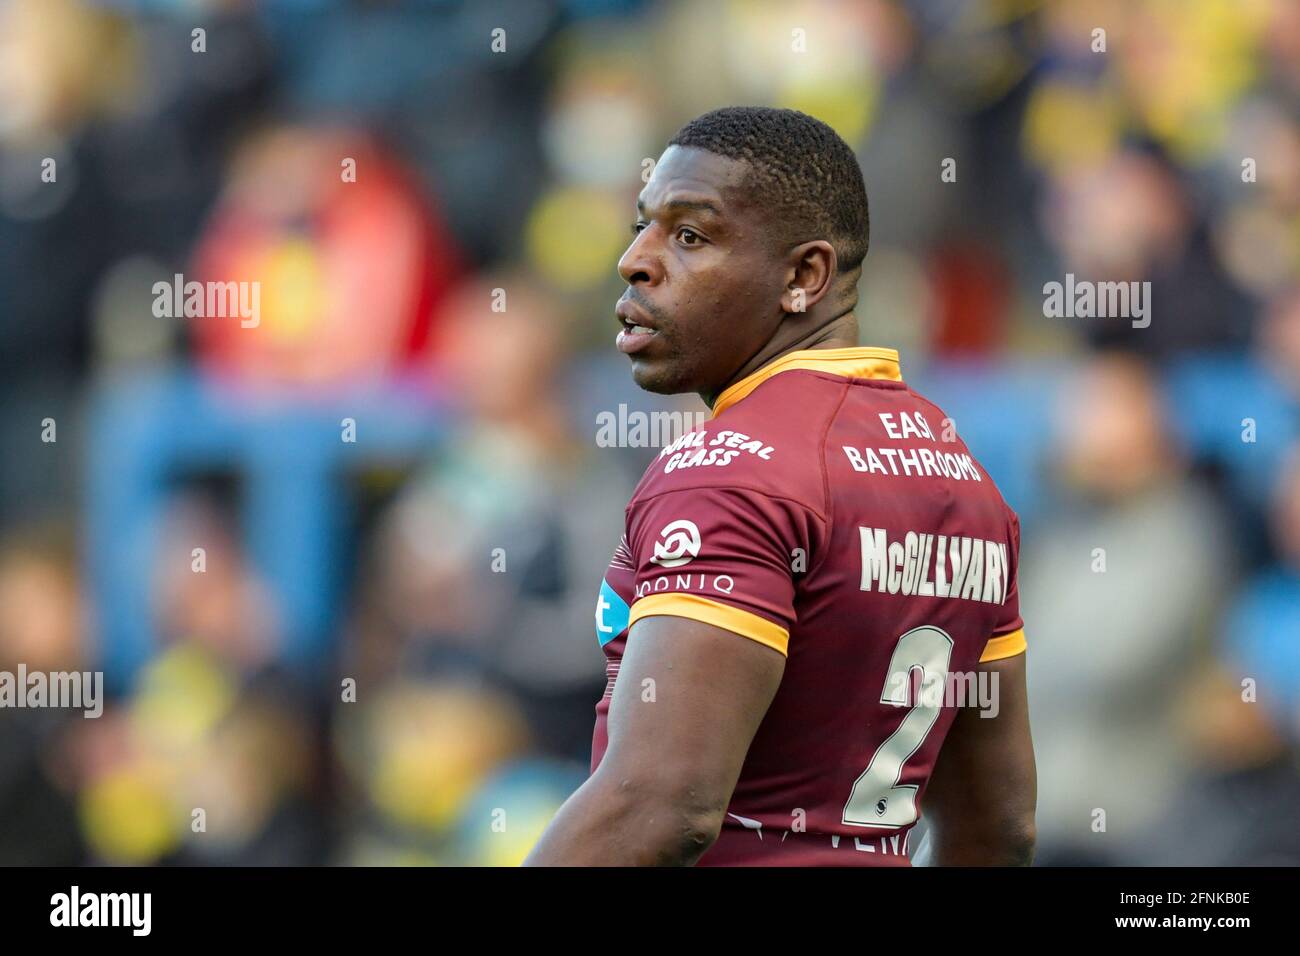 Warrington, UK. 17th May, 2021. Jermaine McGillvary (2) of Huddersfield Giants in action during the game in Warrington, United Kingdom on 5/17/2021. (Photo by Simon Whitehead/News Images/Sipa USA) Credit: Sipa USA/Alamy Live News Stock Photo